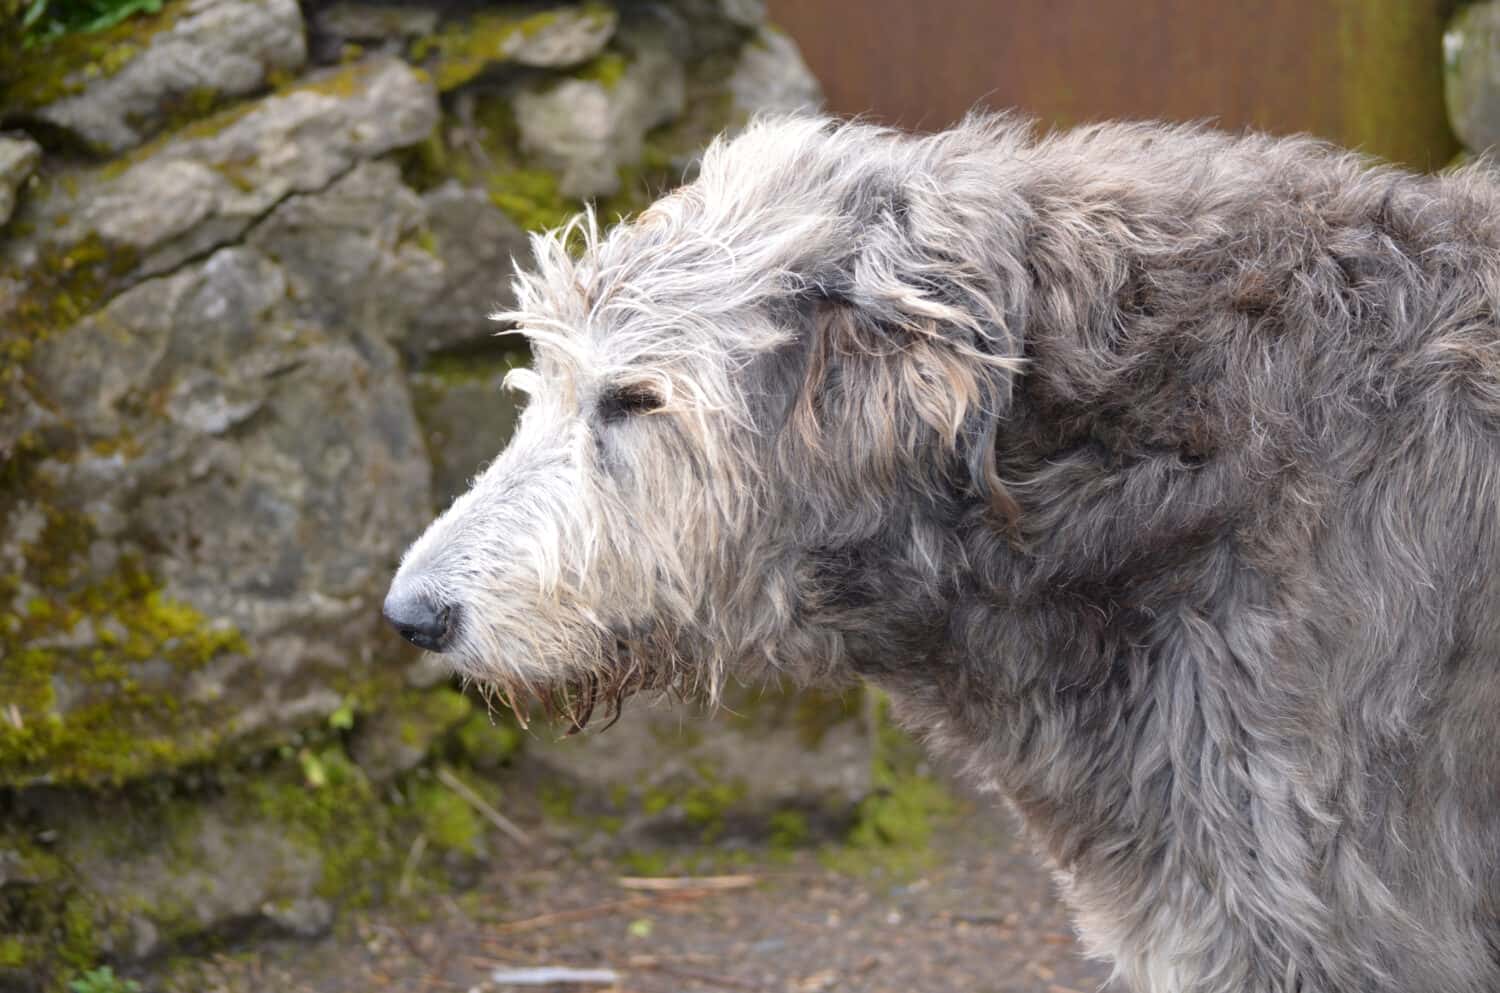 Beautiful side profile of an Irish Wolfhound dog outside a castle in Ireland.